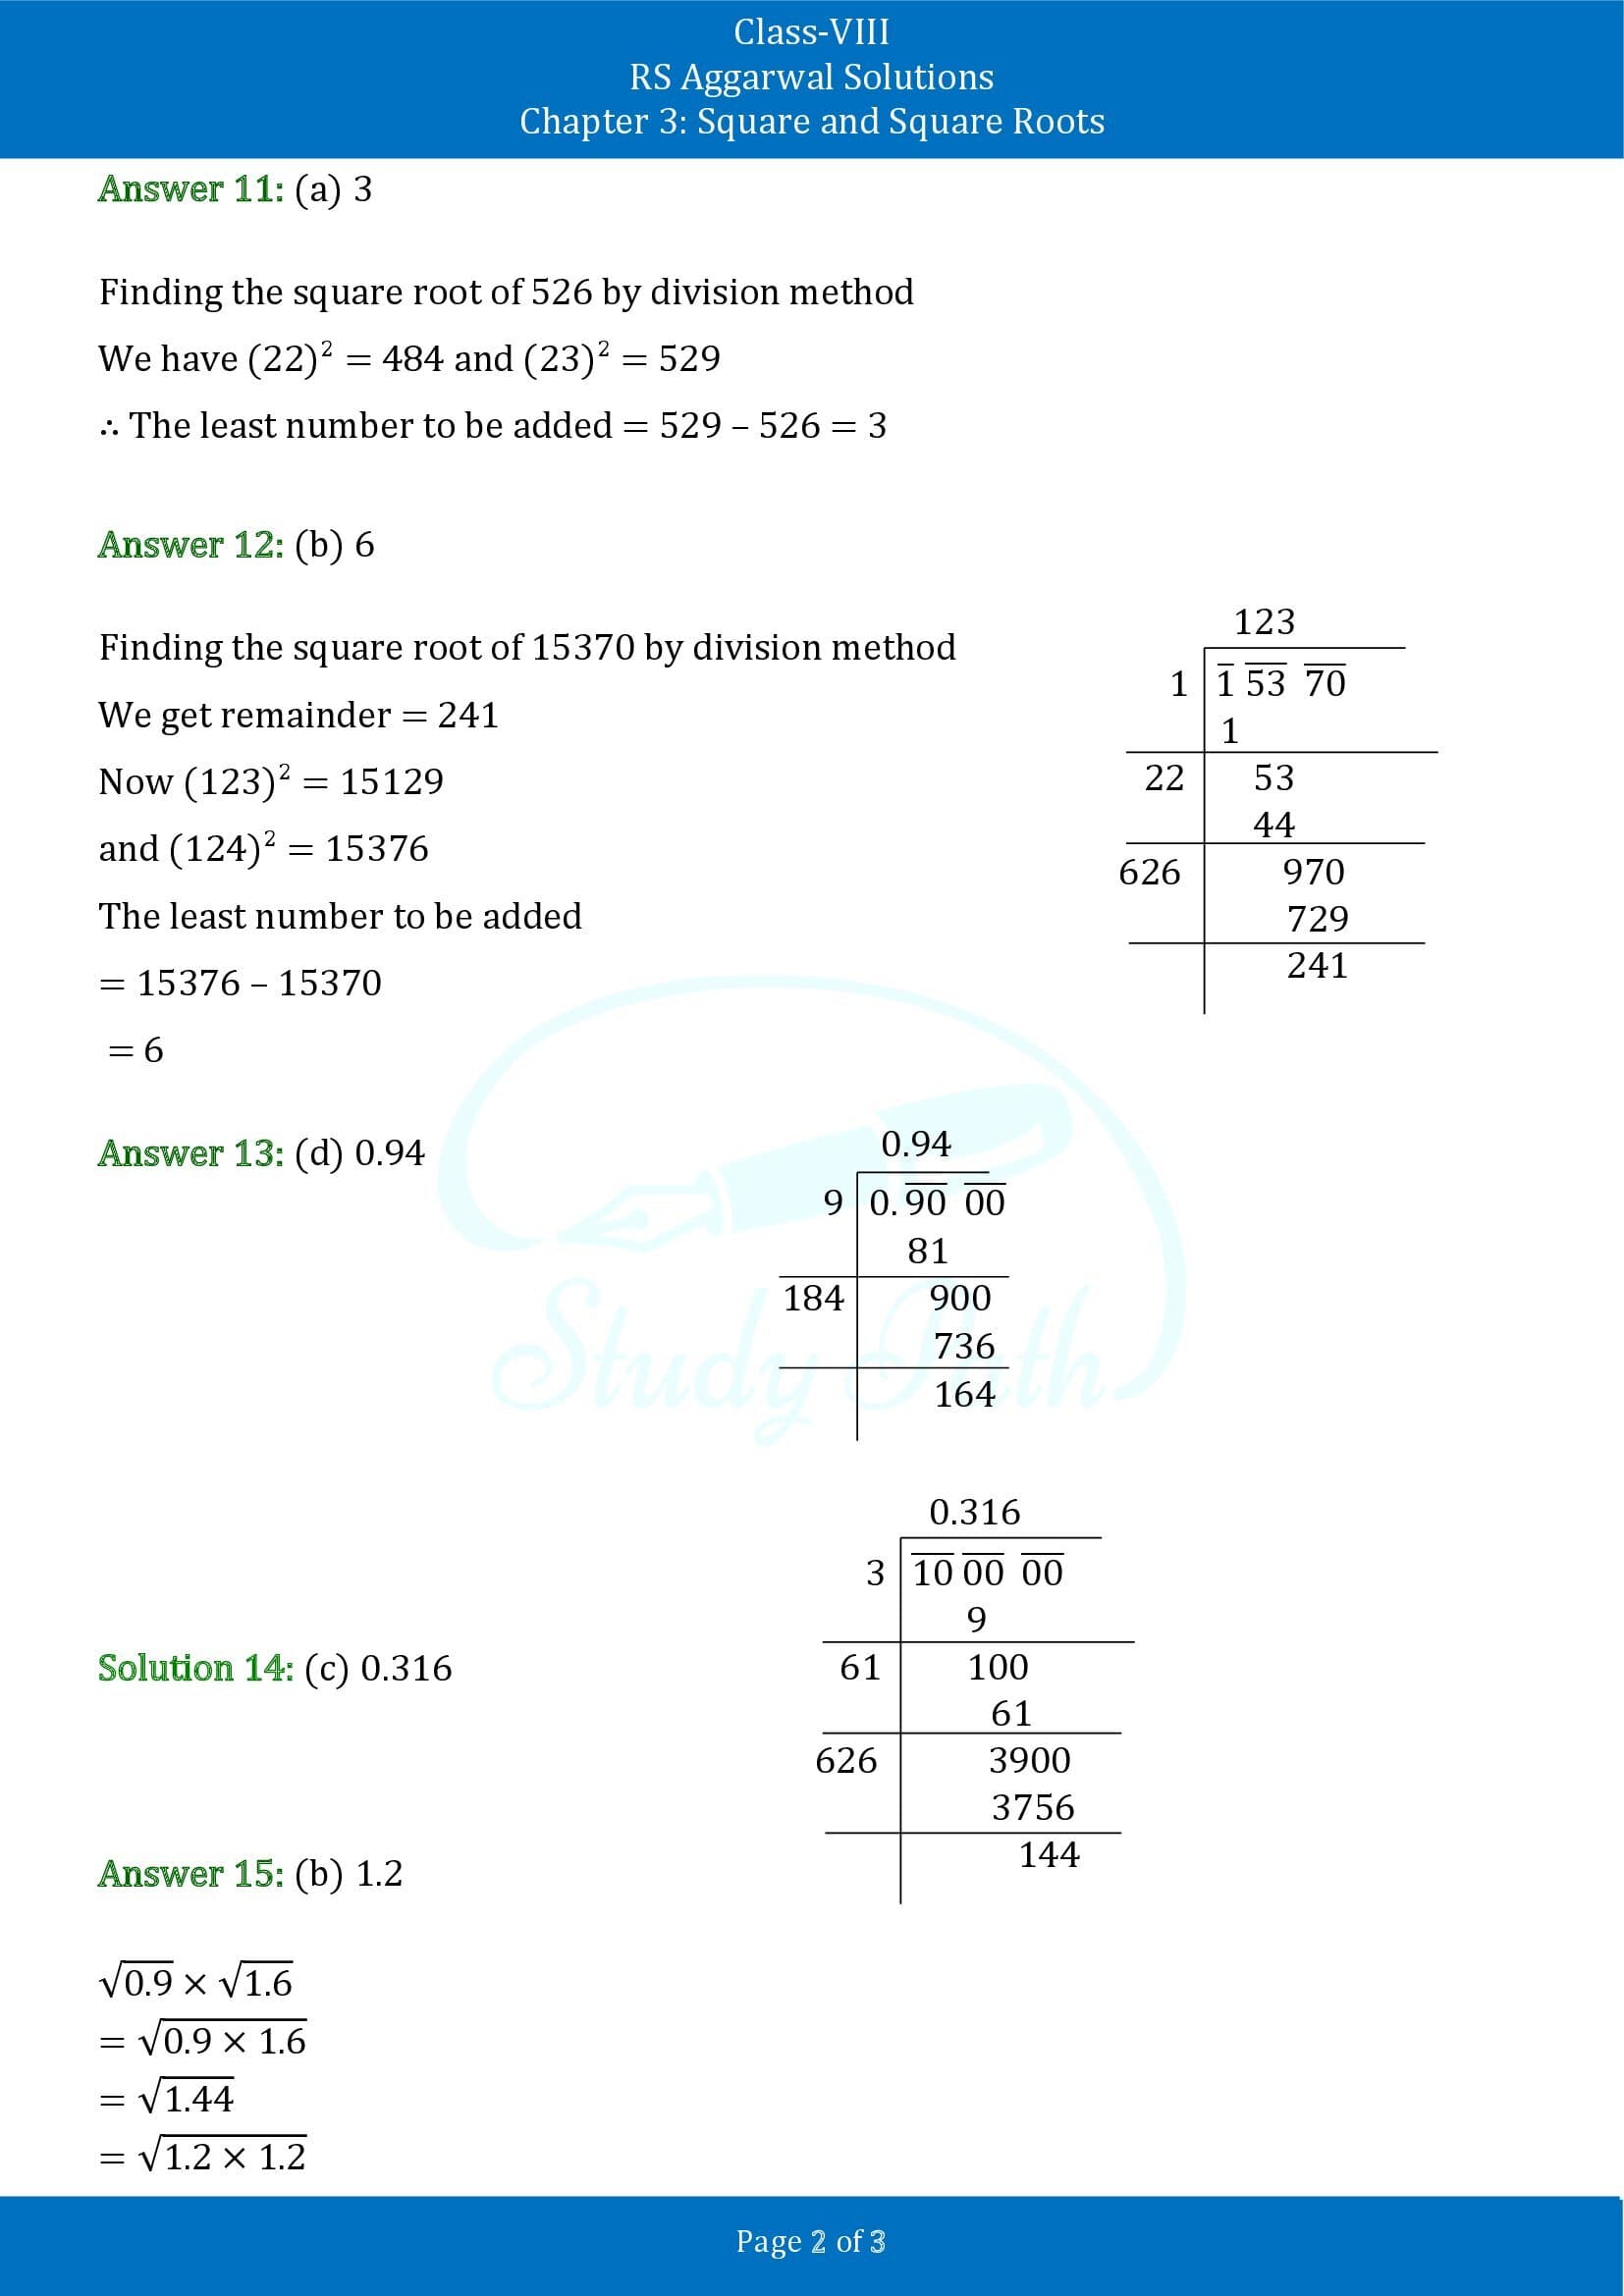 RS Aggarwal Solutions Class 8 Chapter 3 Square and Square Roots Exercise 3H MCQs 00002